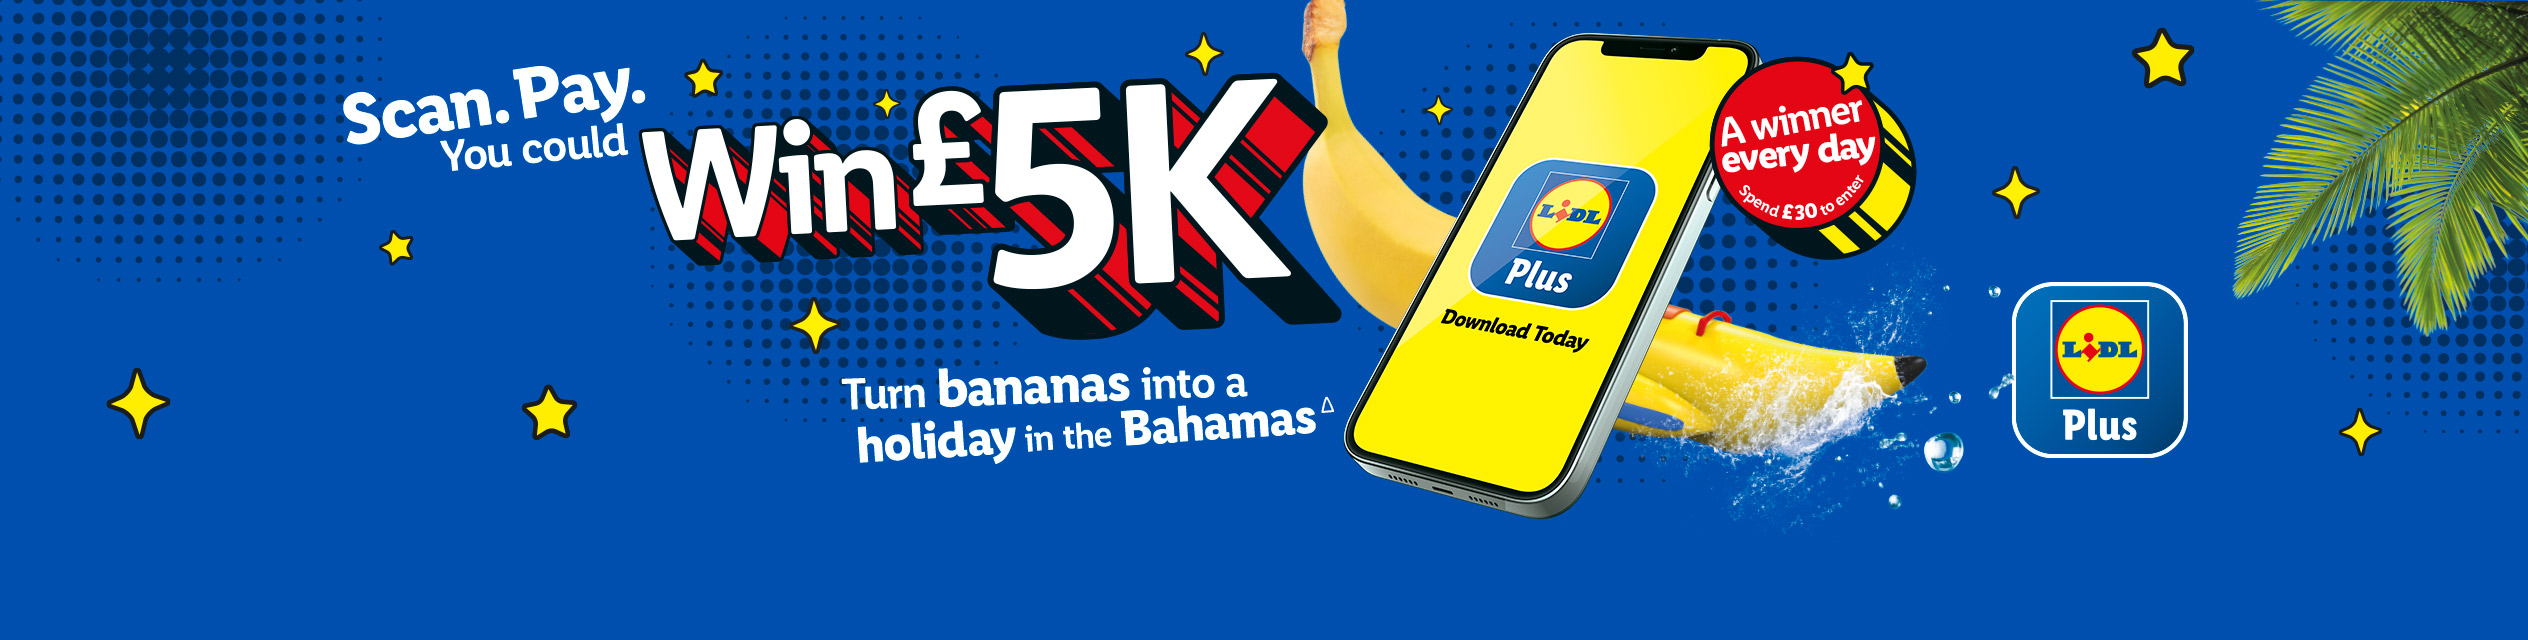 Chance to win with Lidl Plus